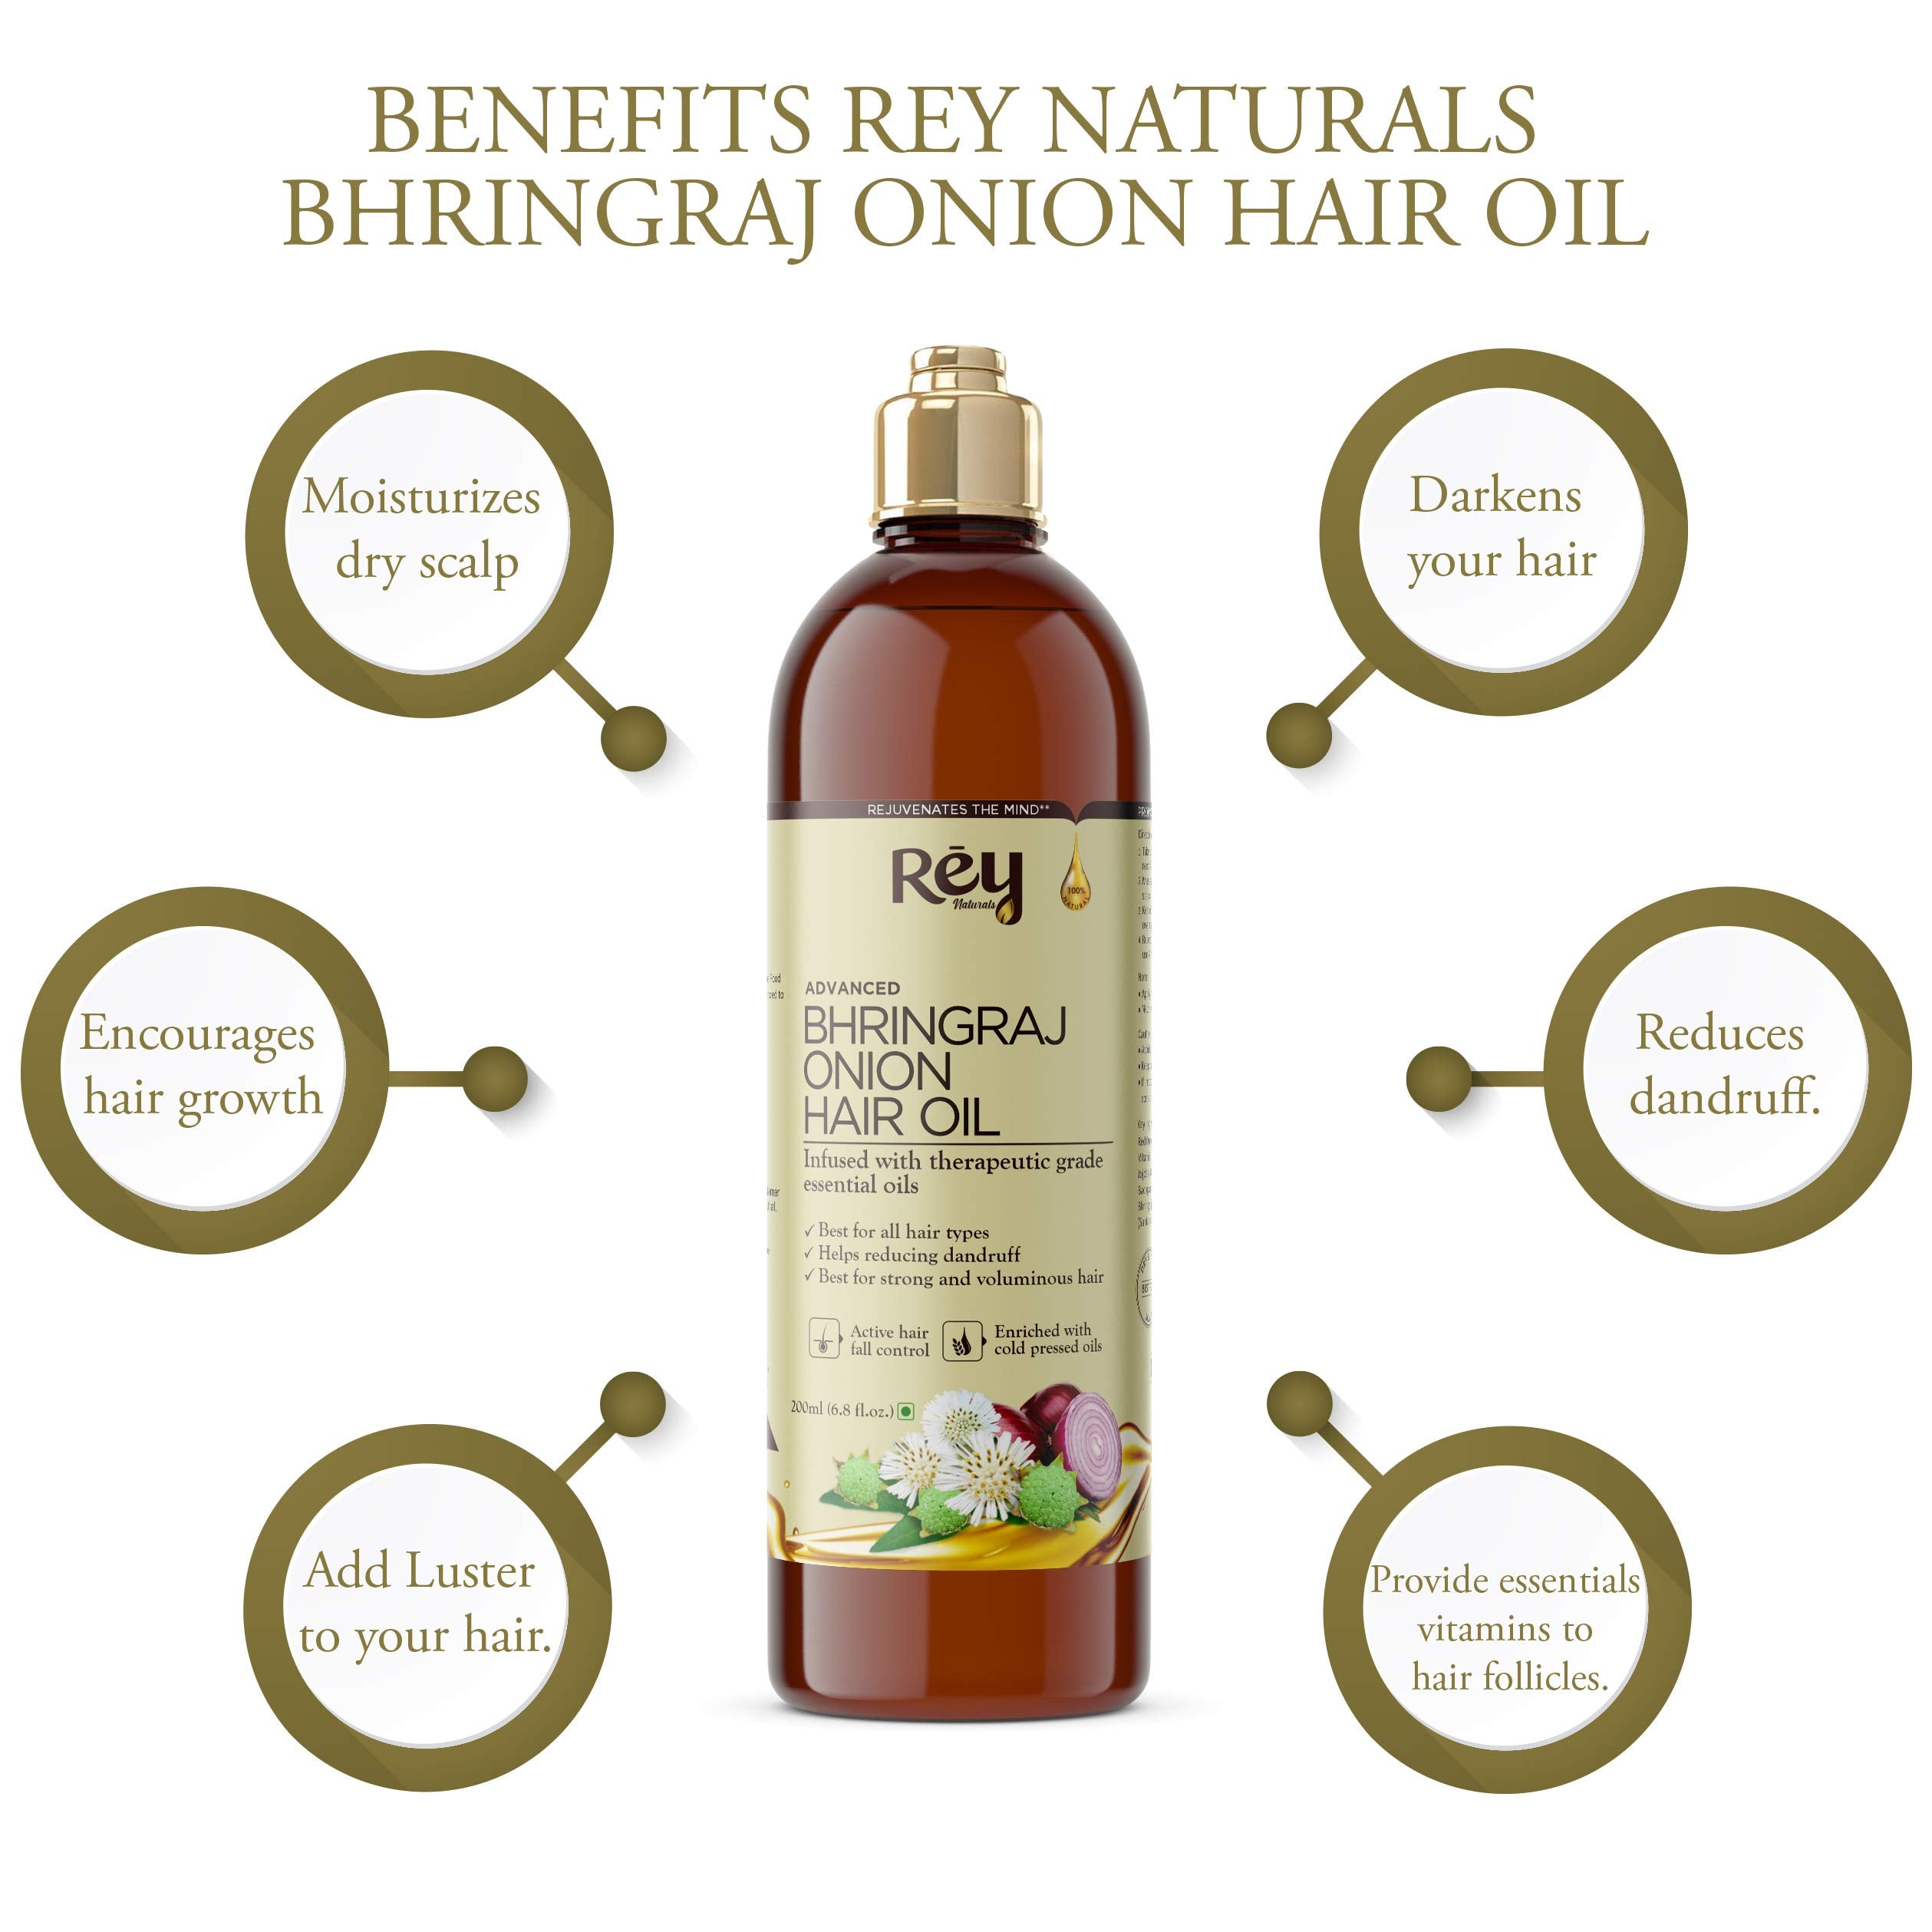 Rey Naturals Bhringraj oil with Onion extract For Hair Strengthening, Anti-hair Fall, Split-ends - 200 ml